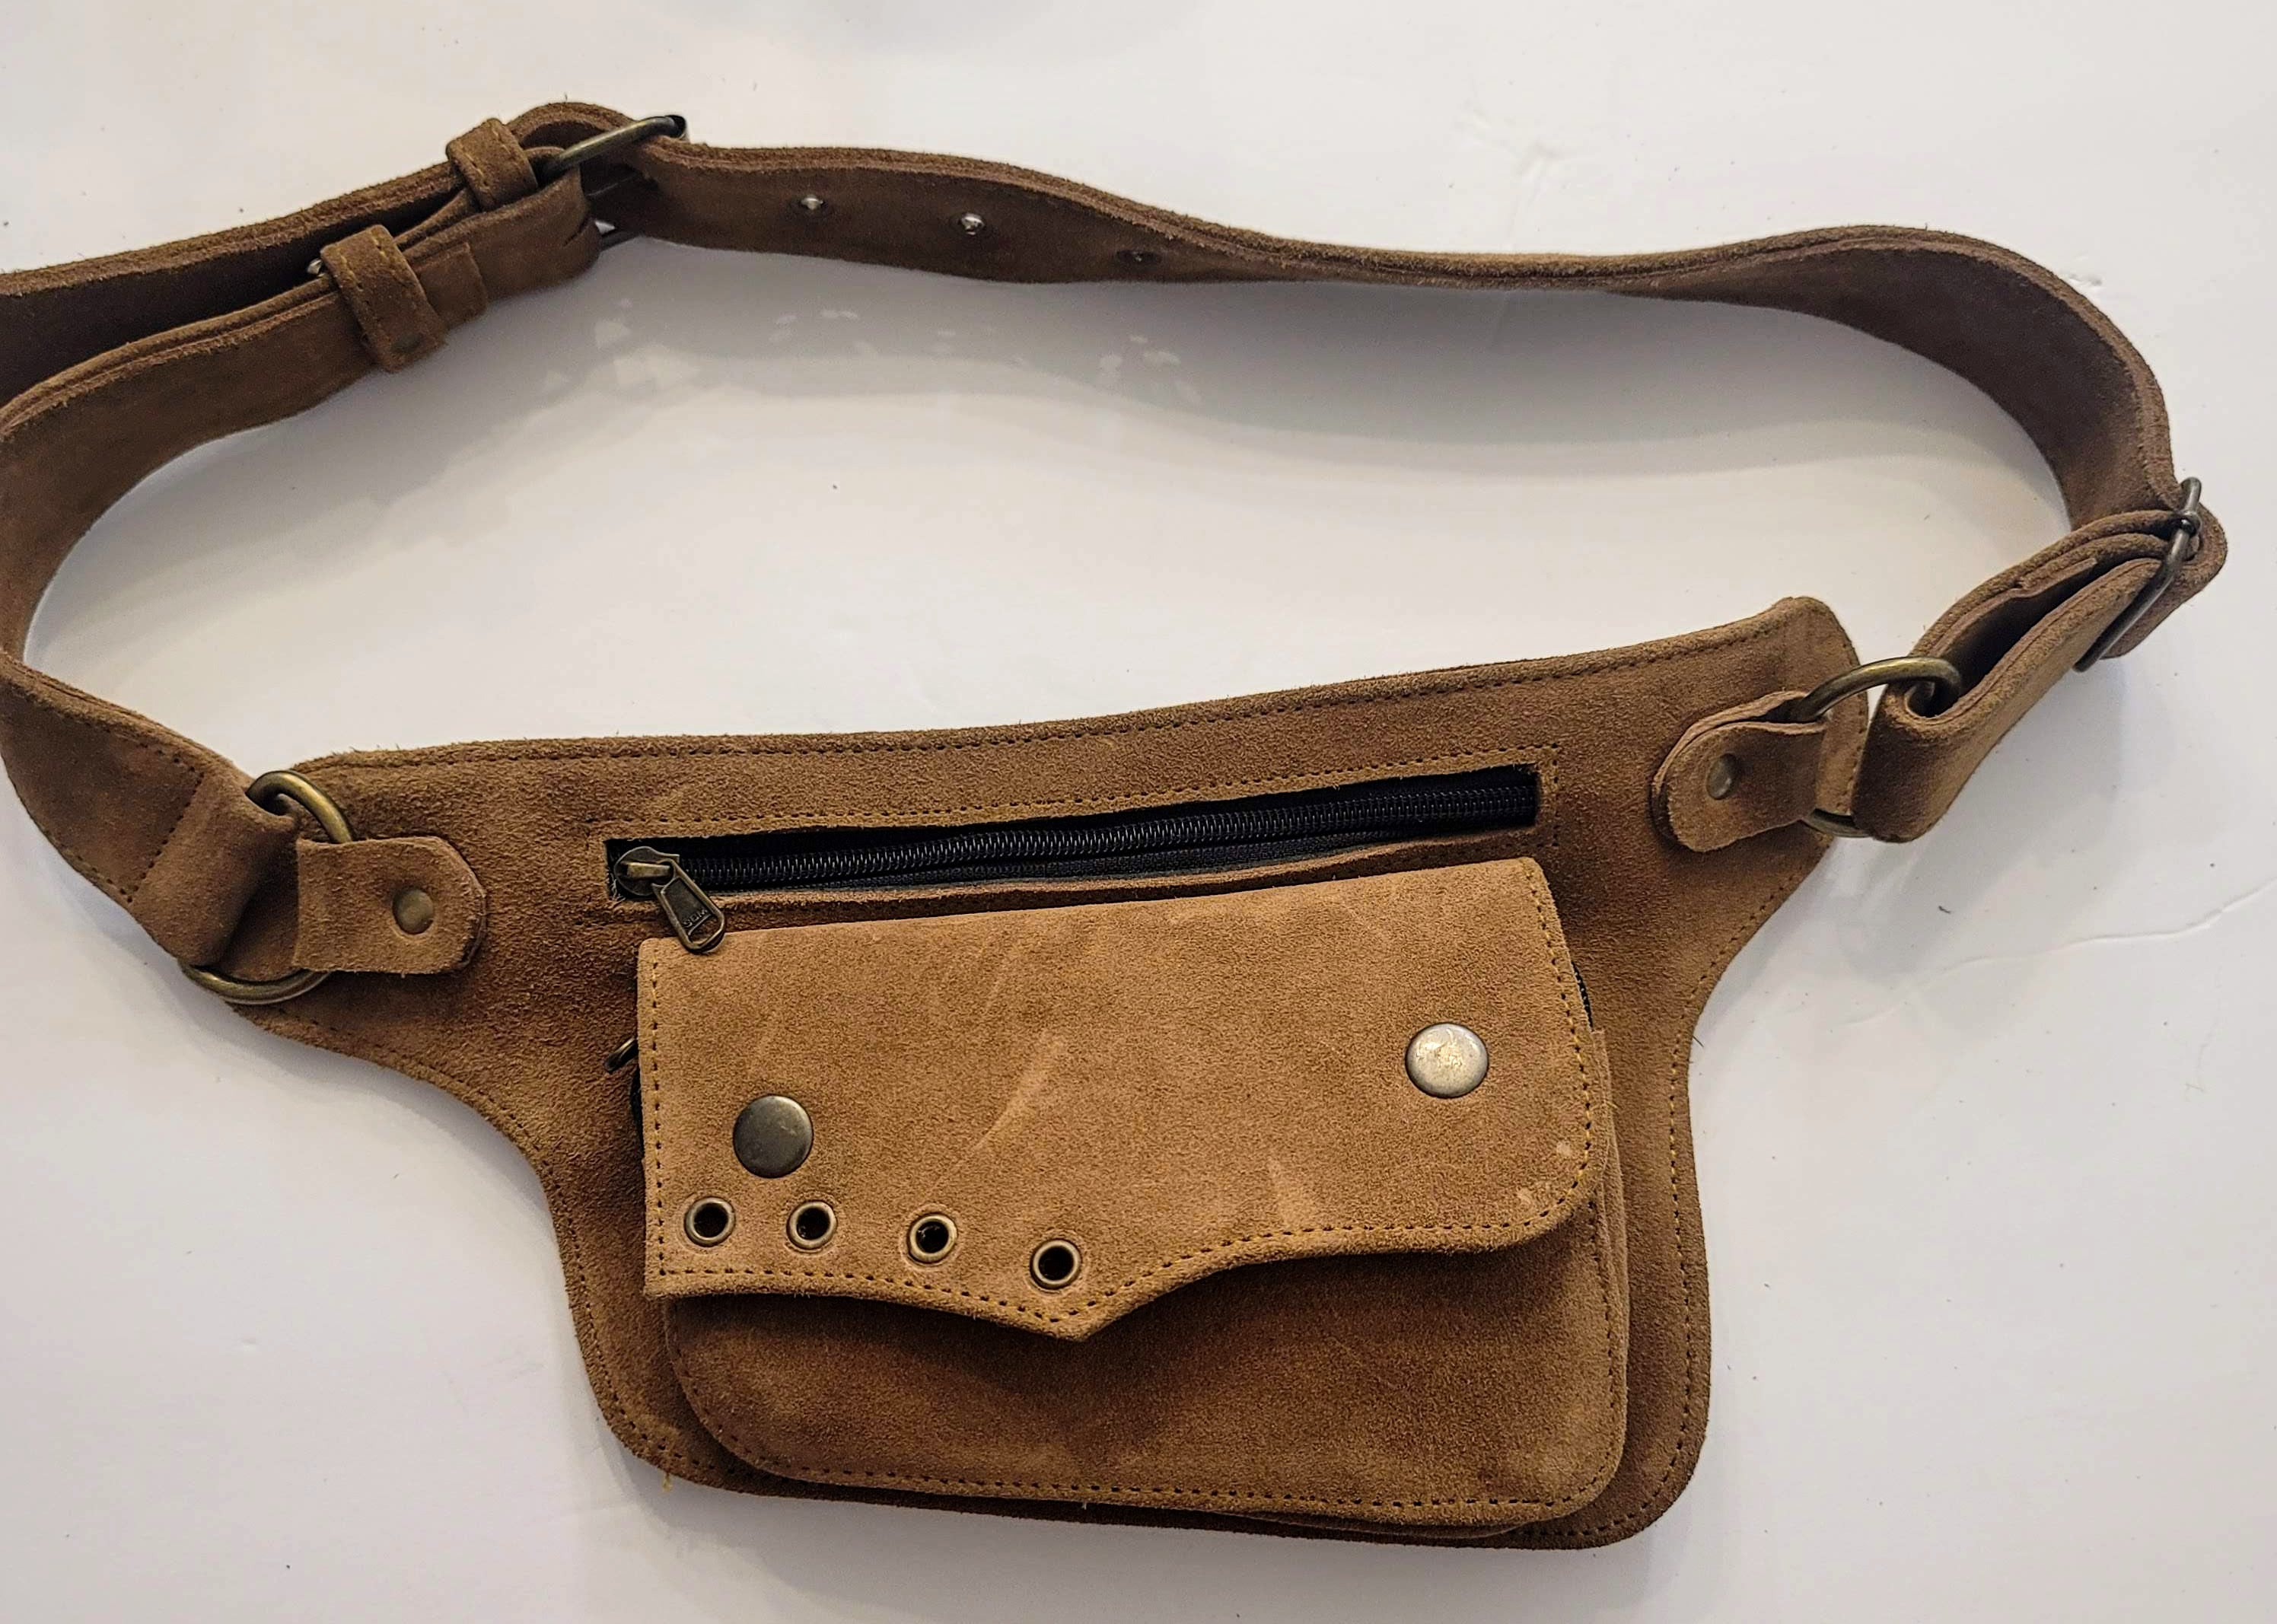 Handmade Genuine Leather Fanny Pack, with real gems stone Women Fanny Pack, Belt Bag, Men's Leather Fanny Pack, Adjustable Leather